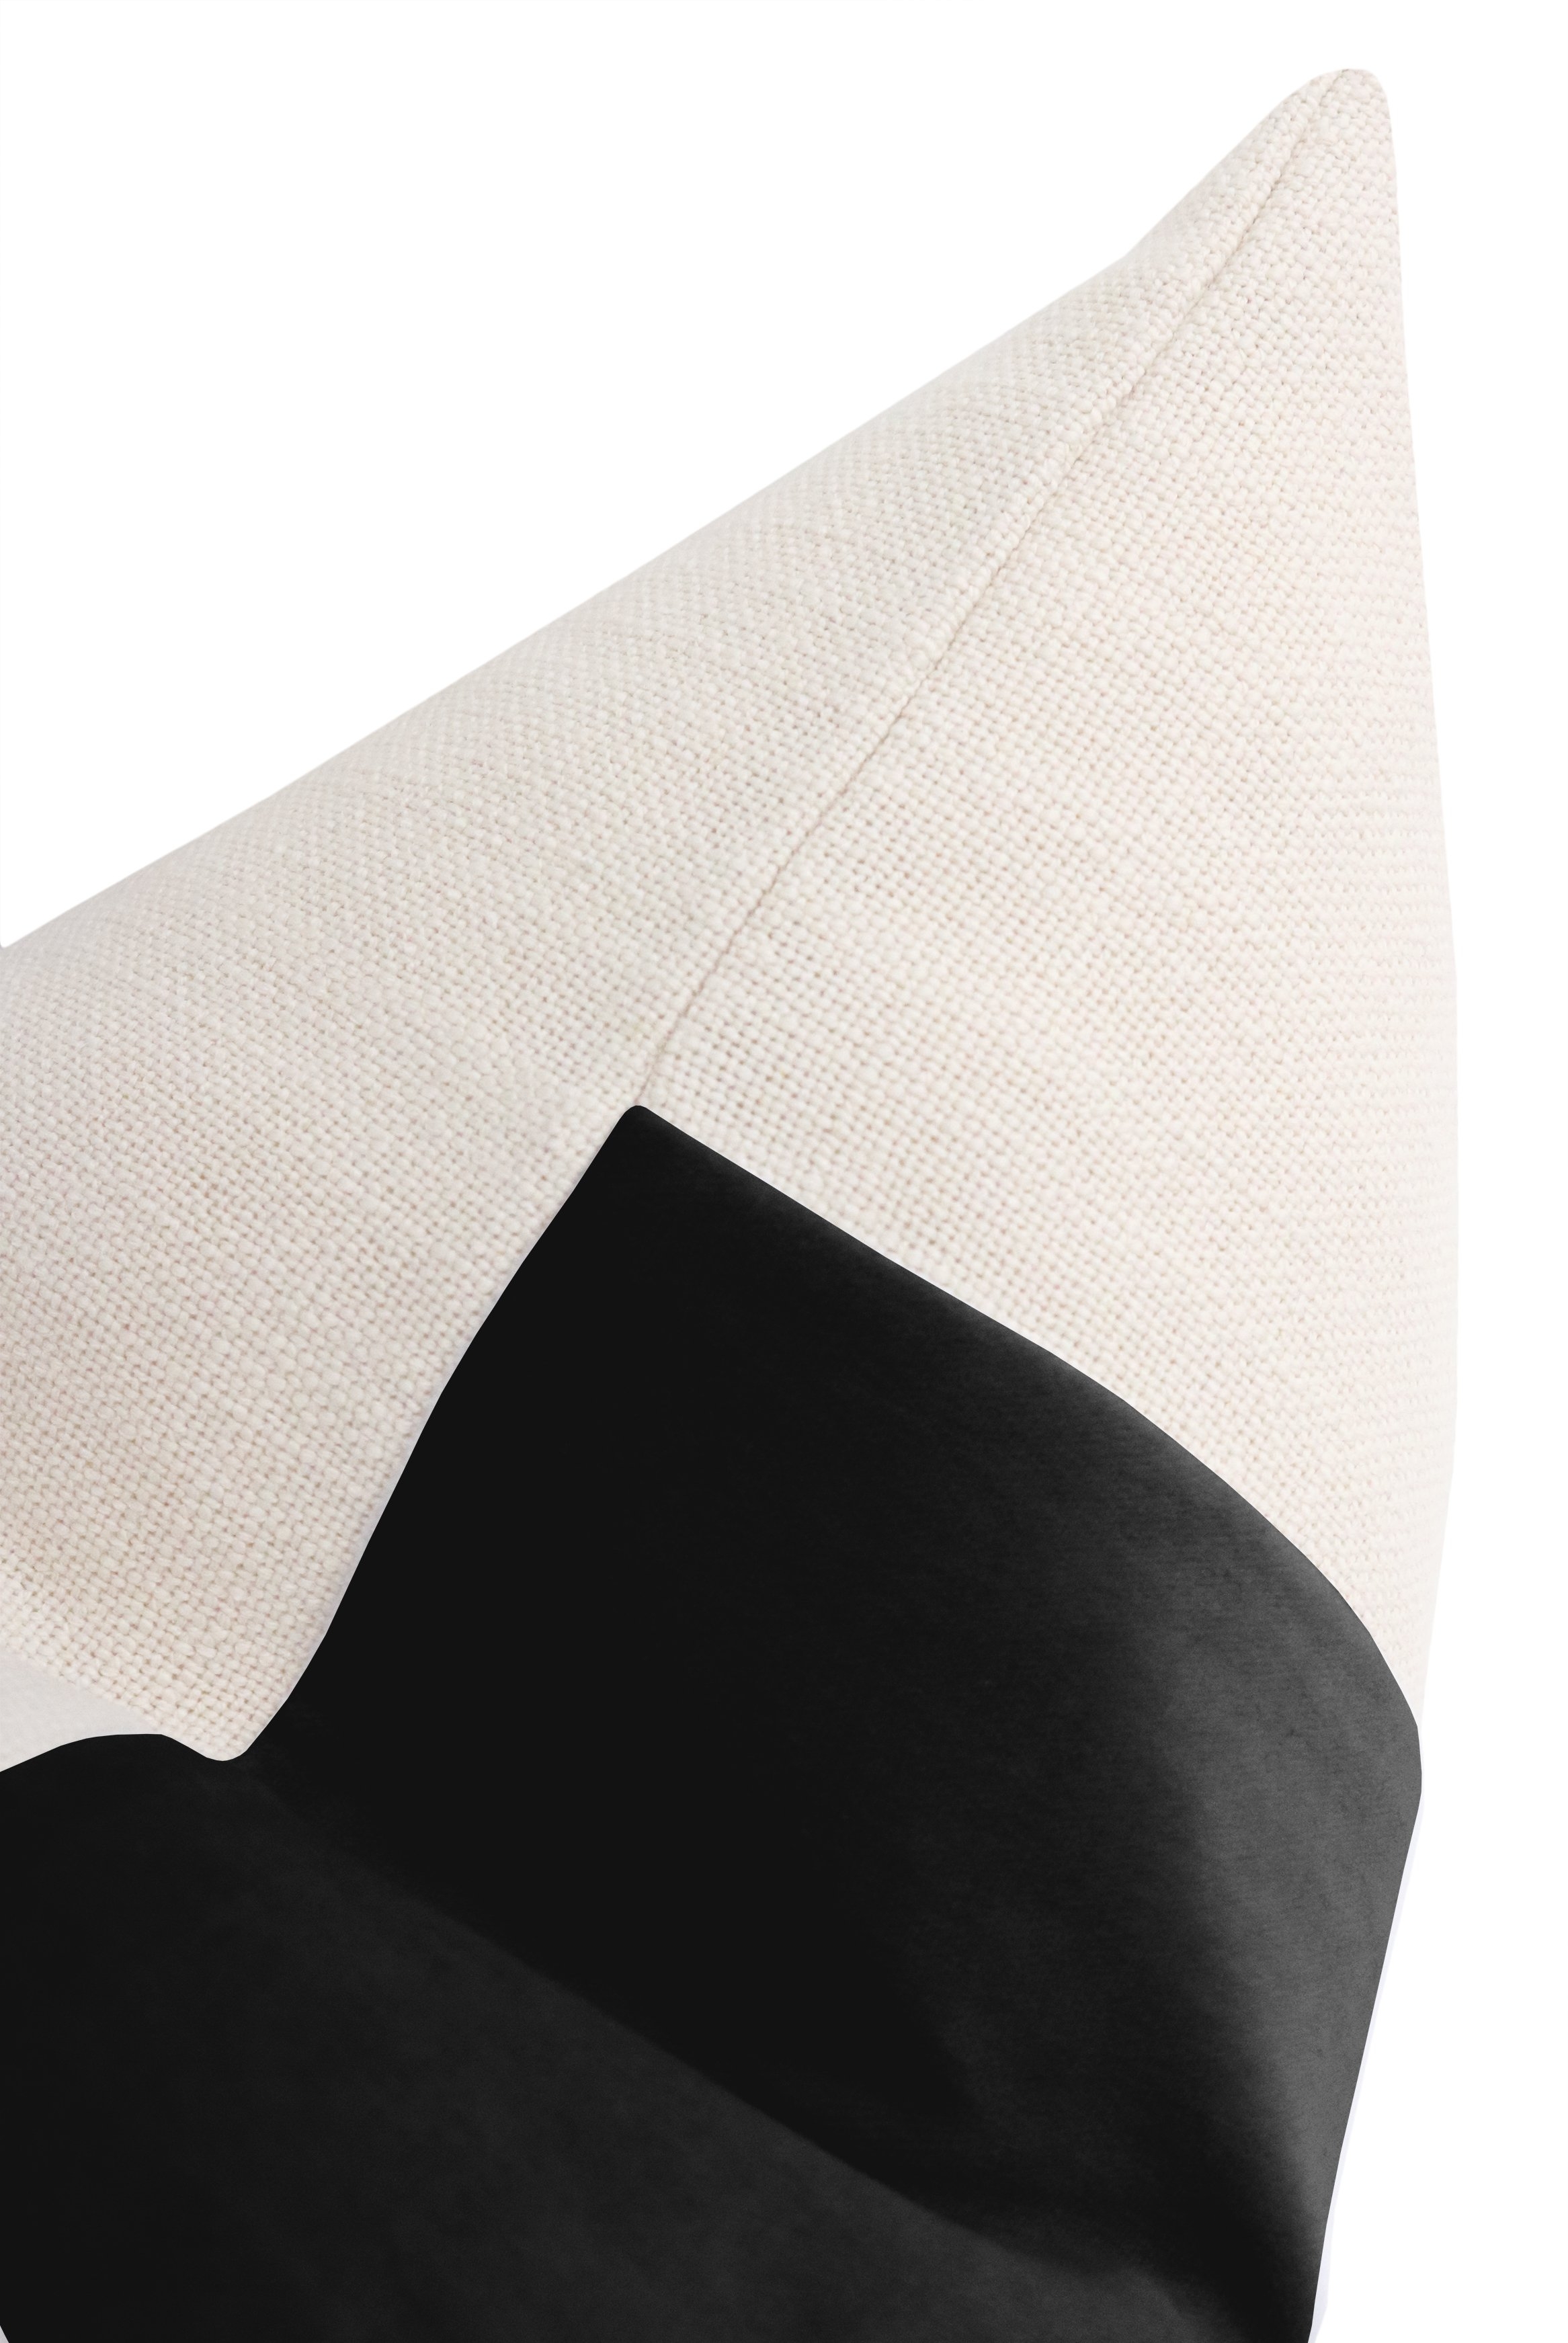 Discontinued The Little Lumbar :: PANEL Classic Velvet // Ebony - 12" X 18" PILLOW COVER - Image 2